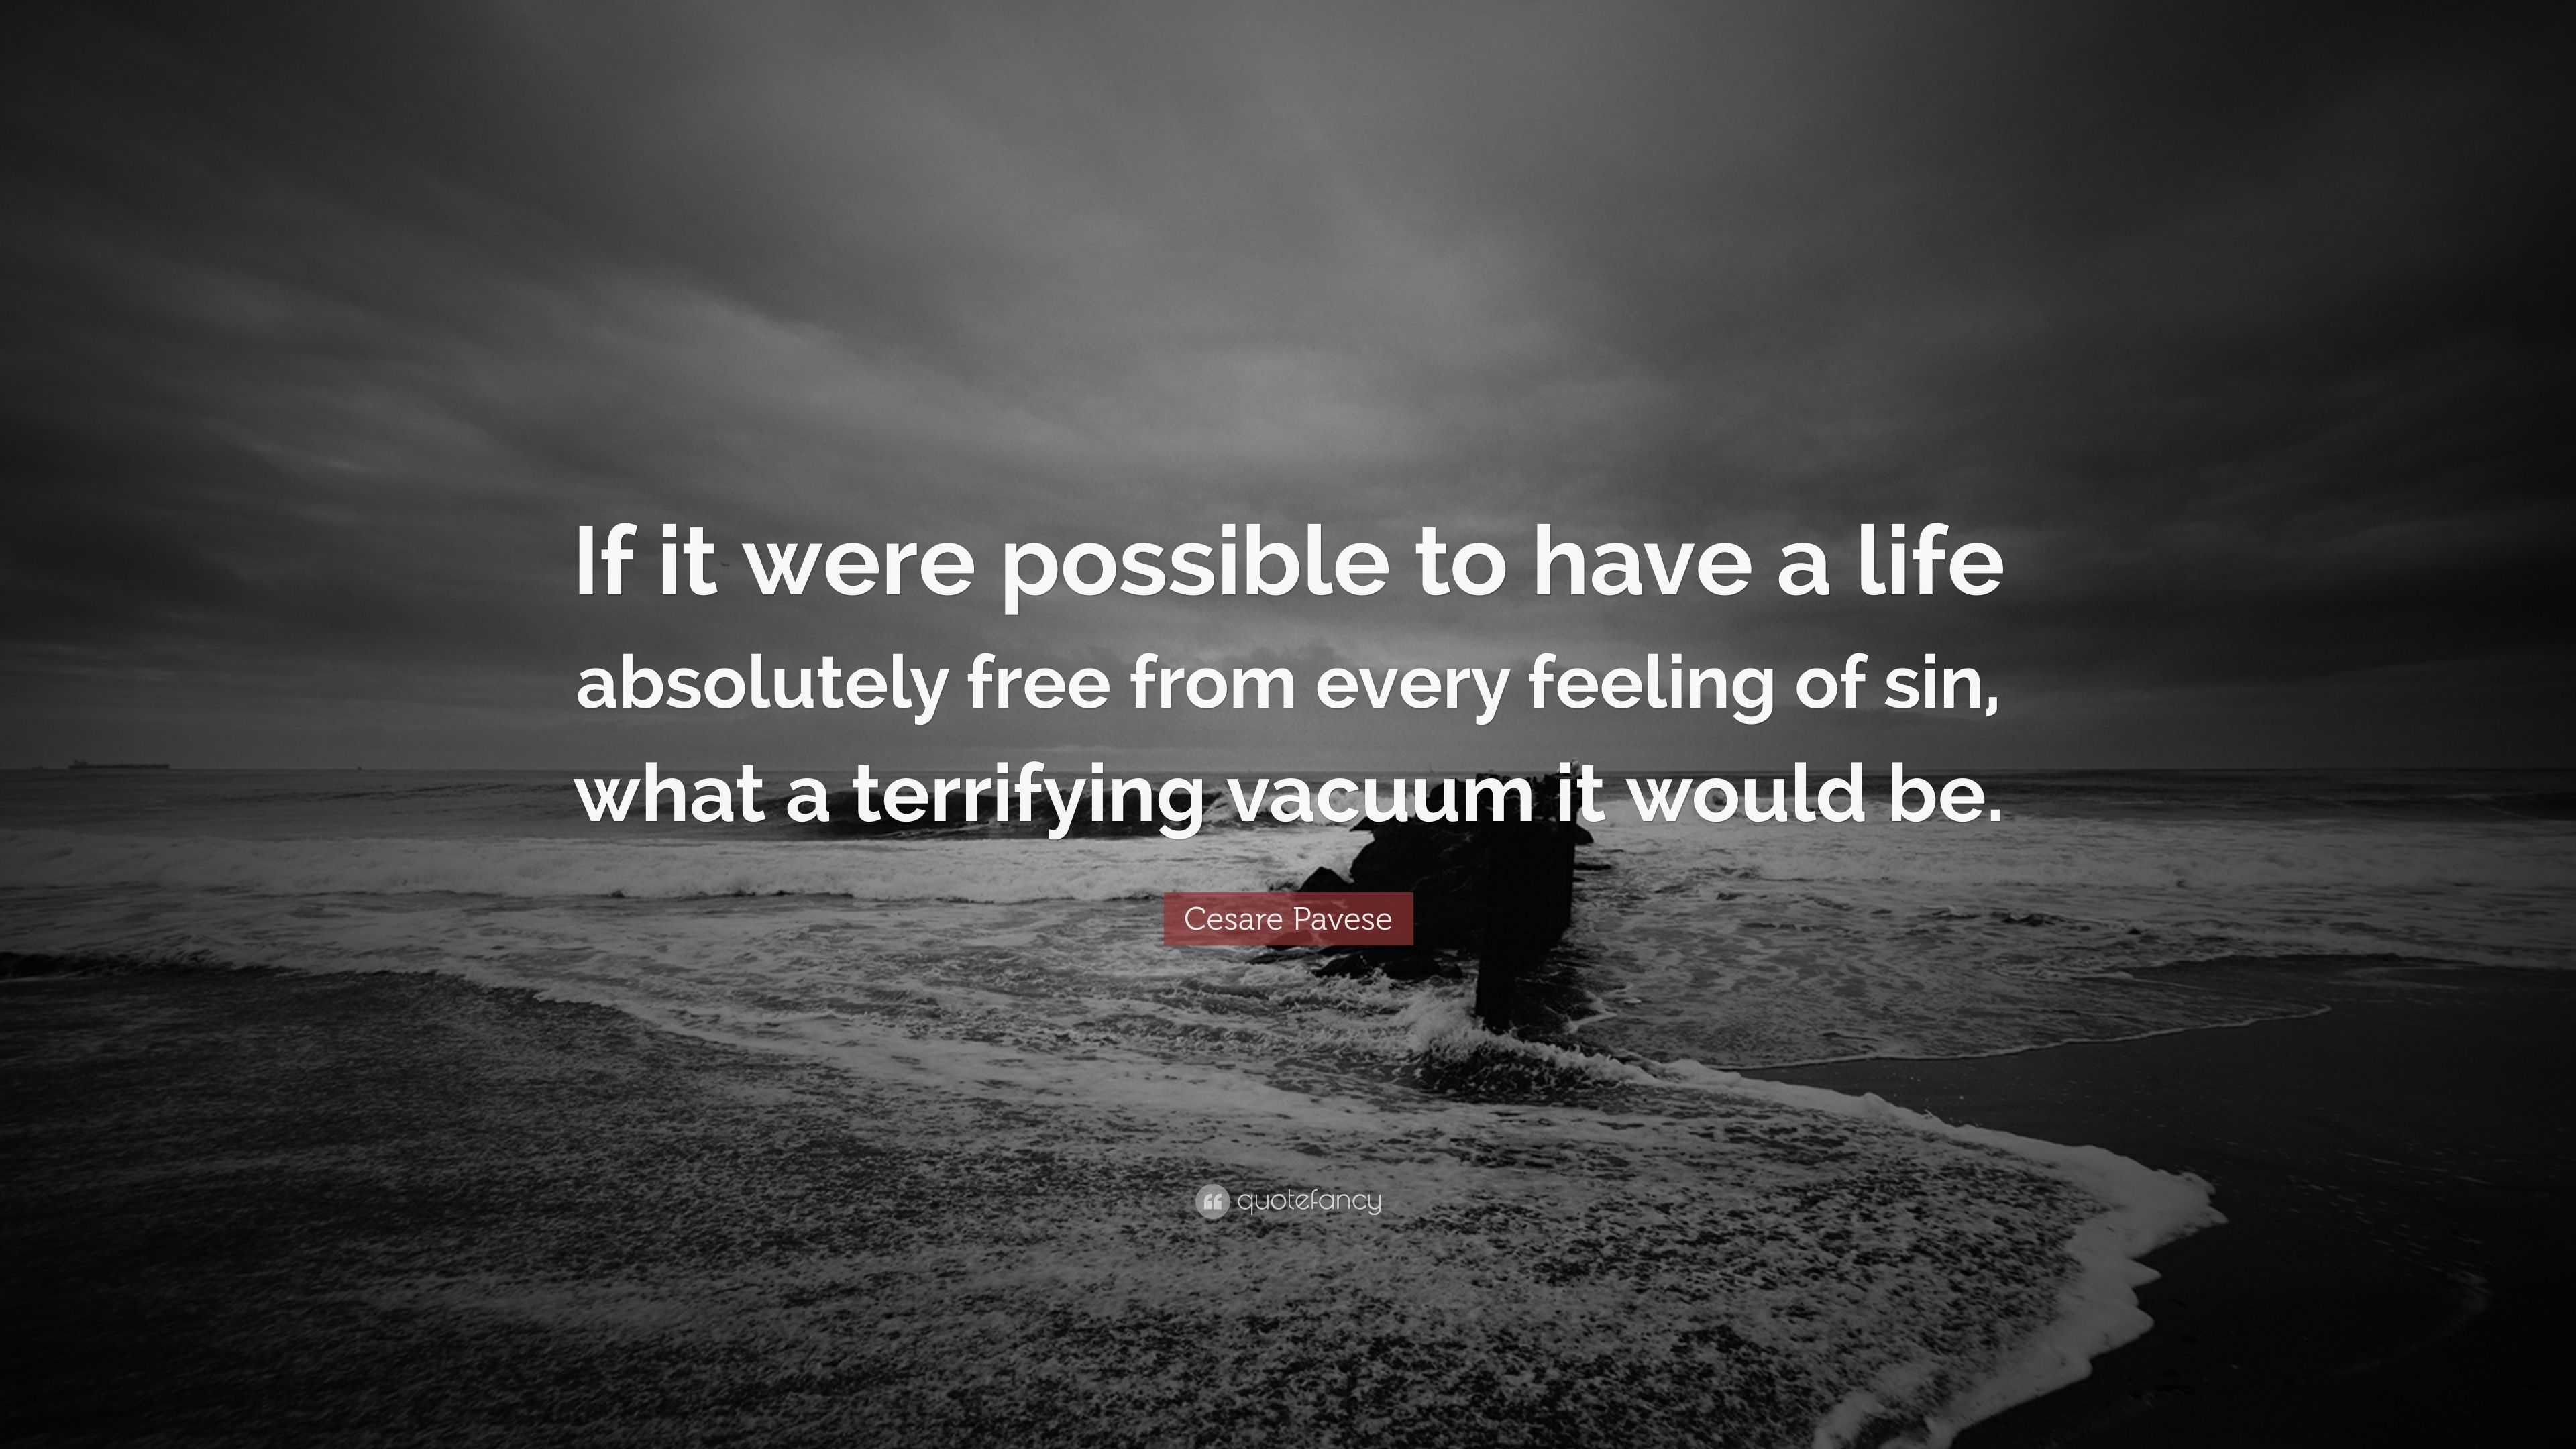 Cesare Pavese Quote: “If it were possible to have a life absolutely free  from every feeling